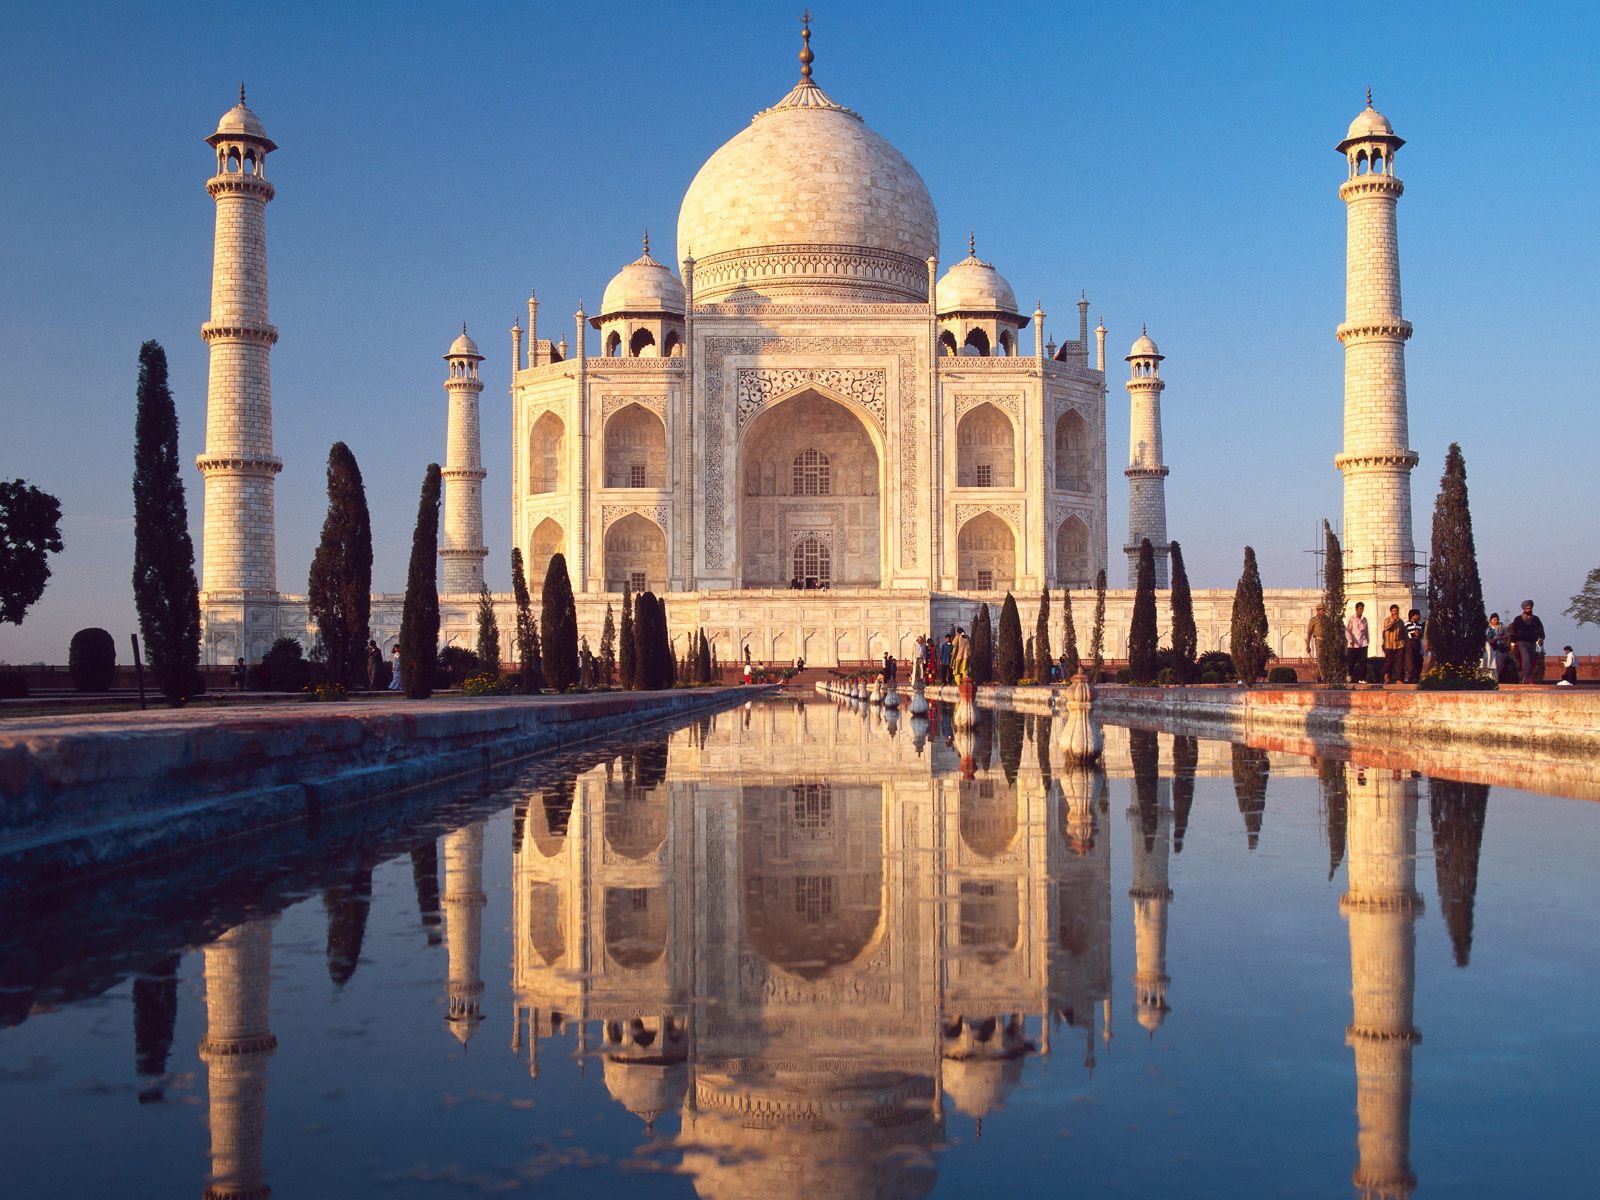 Top 10 Most Iconic Buildings in the World - Toptenz.net : The incredible image depicting an gorgeous scenery. The tones are just striking and combination ideally. Its arrangement is wonderful, and its features are extremely clear.